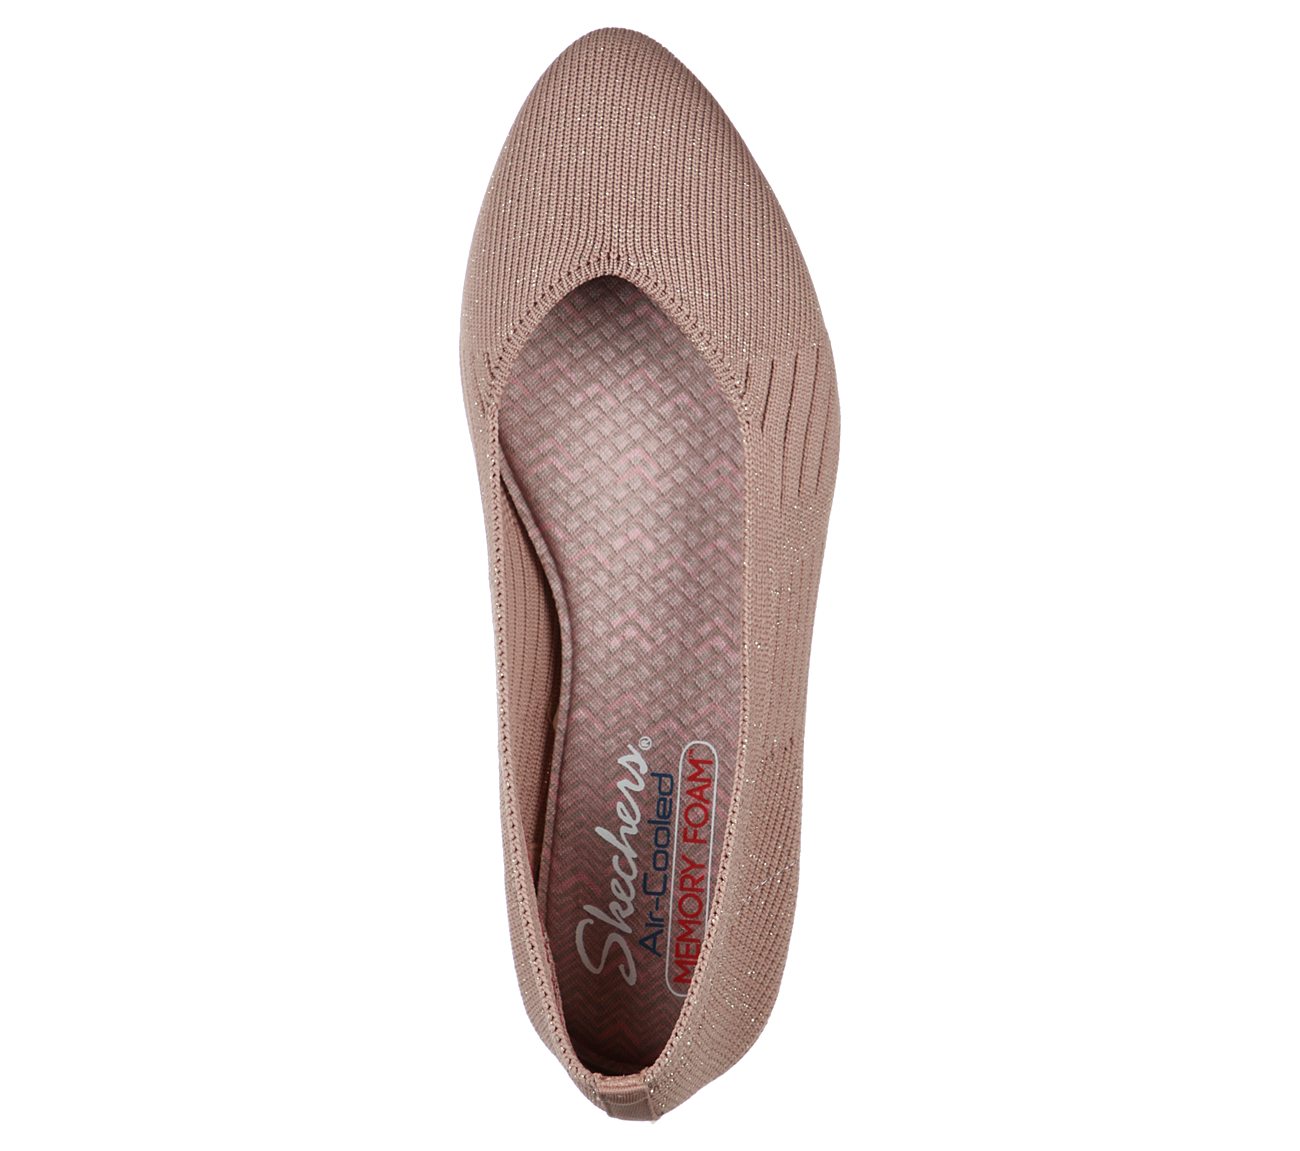 CLEO -  CRAVE, BLUSH Footwear Top View